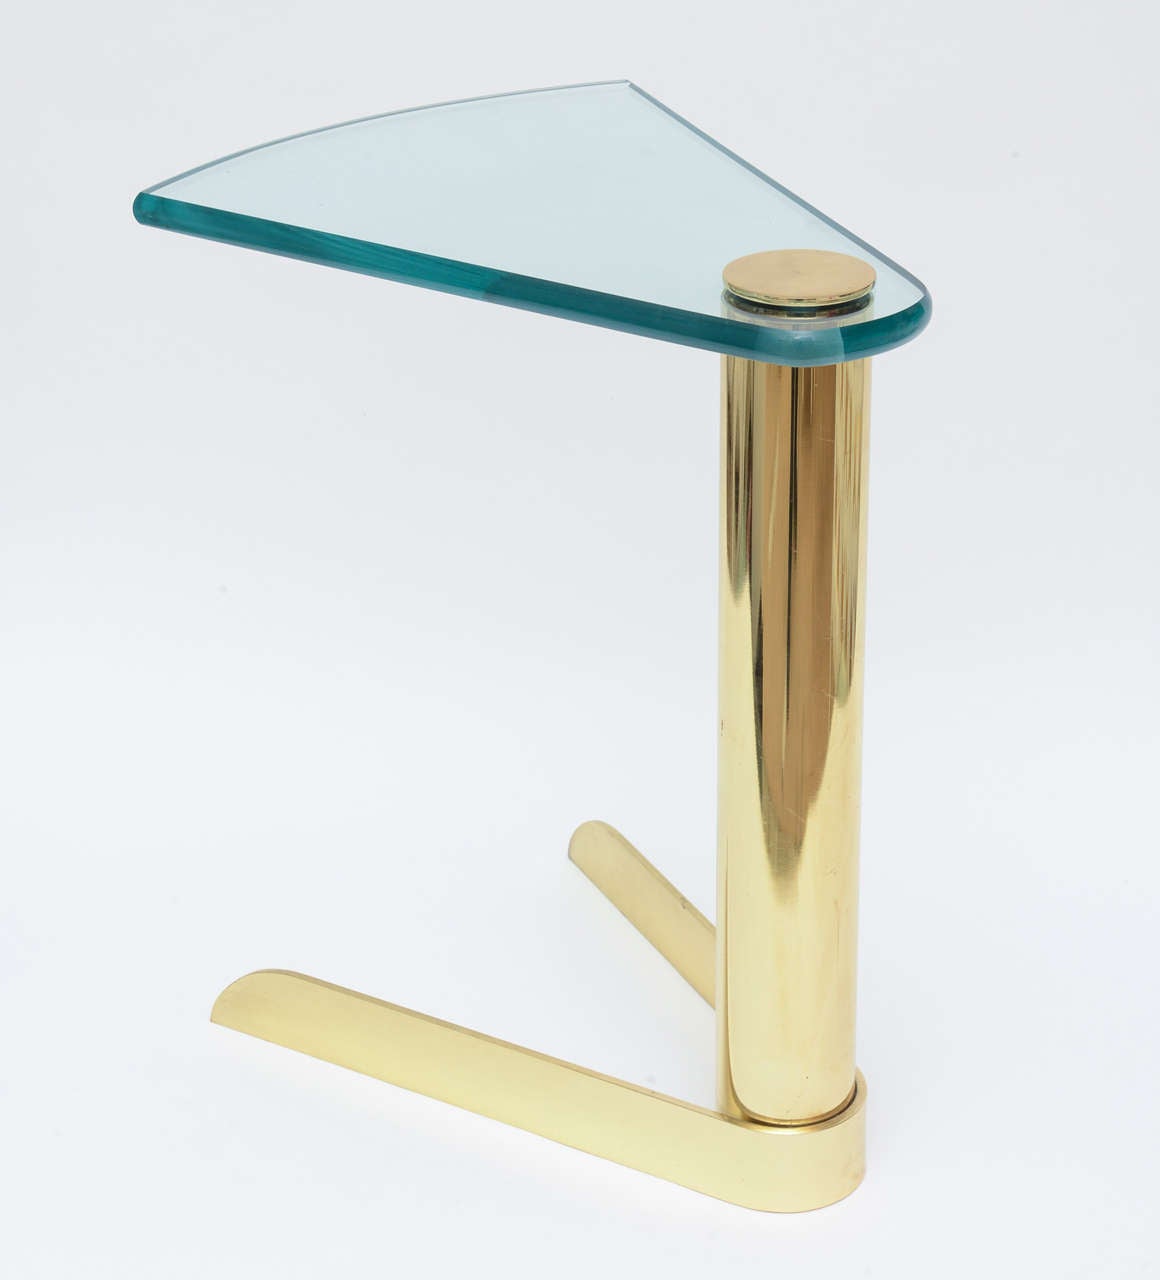 This wonderful and timeless columned and pie shaped base of polished brass and glass make this a sculptural and fun side table. The top unscrews from the base.
It has a great weight to it. The polished glass is 1 inch thick. There is a lacquer